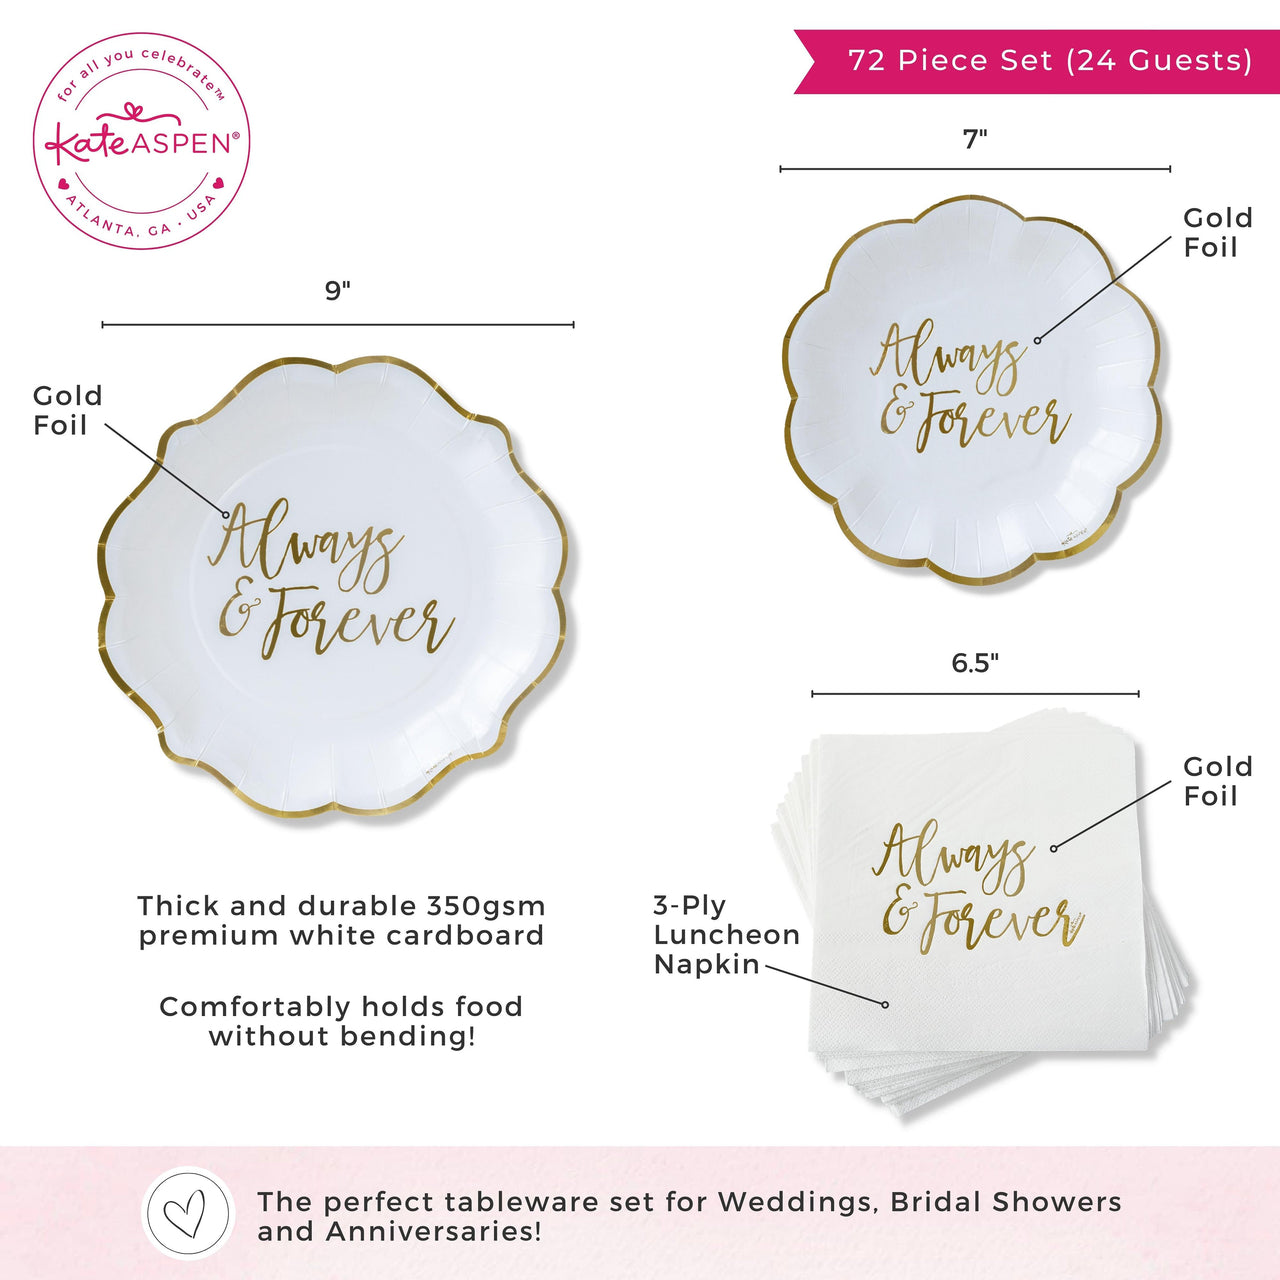 Always & Forever 72 Piece Party Tableware Set (24 Guests) - Alternate Image 6 | My Wedding Favors